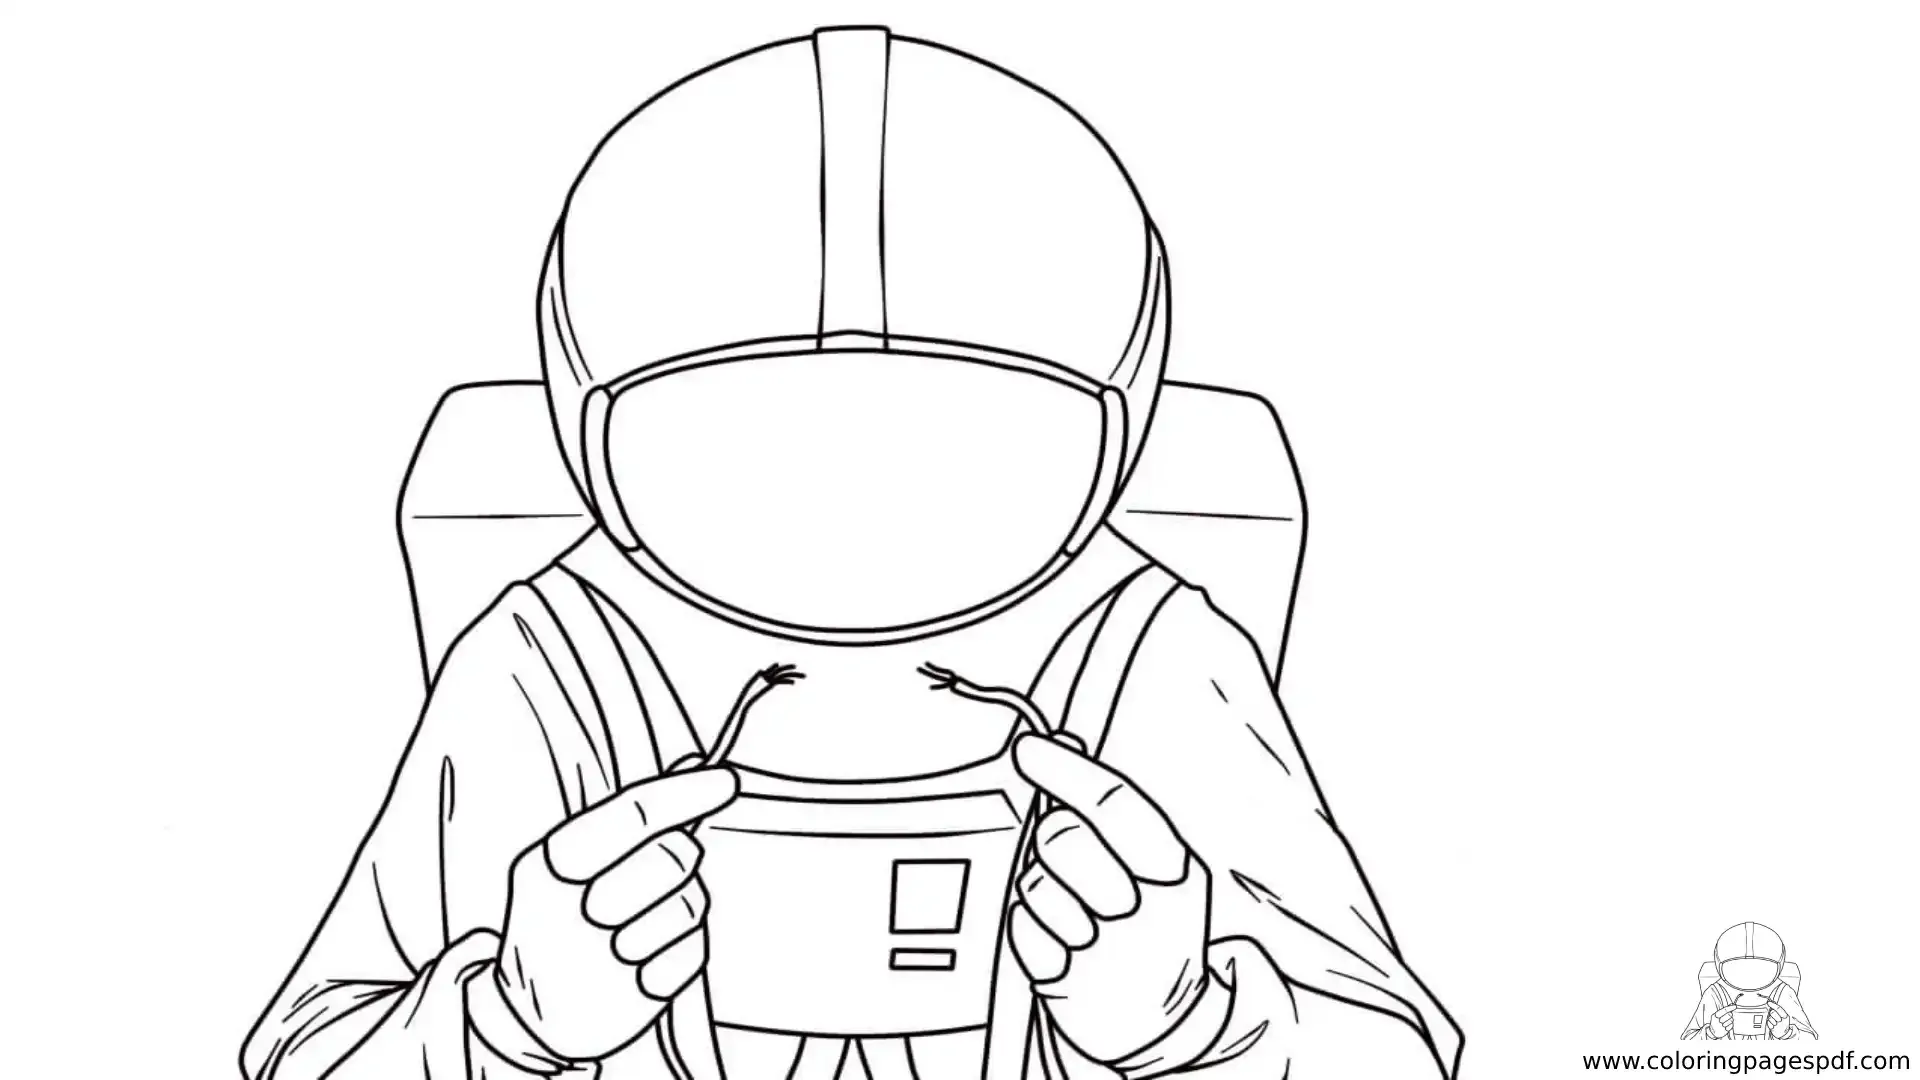 Coloring Page Of Anime Crewmate Doing Wires